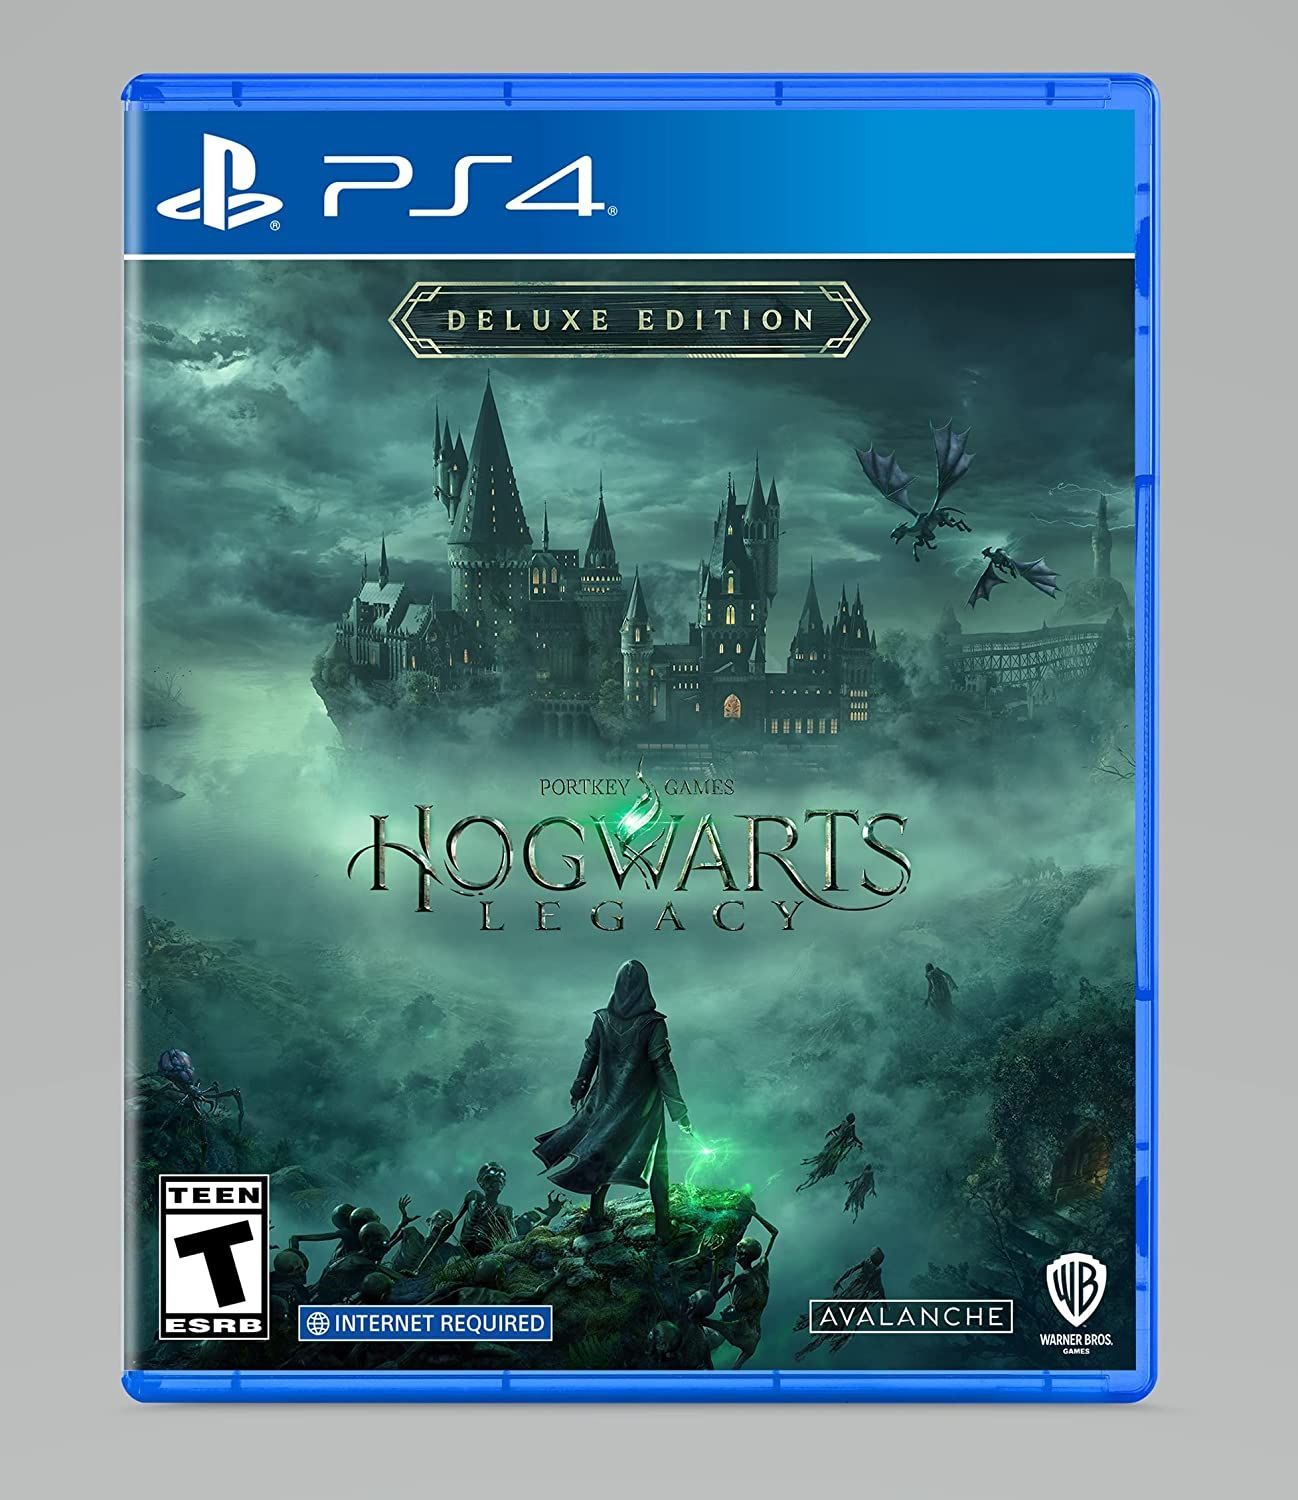 Do You Think Hogwarts Legacy Will Perform Good On Ps4?